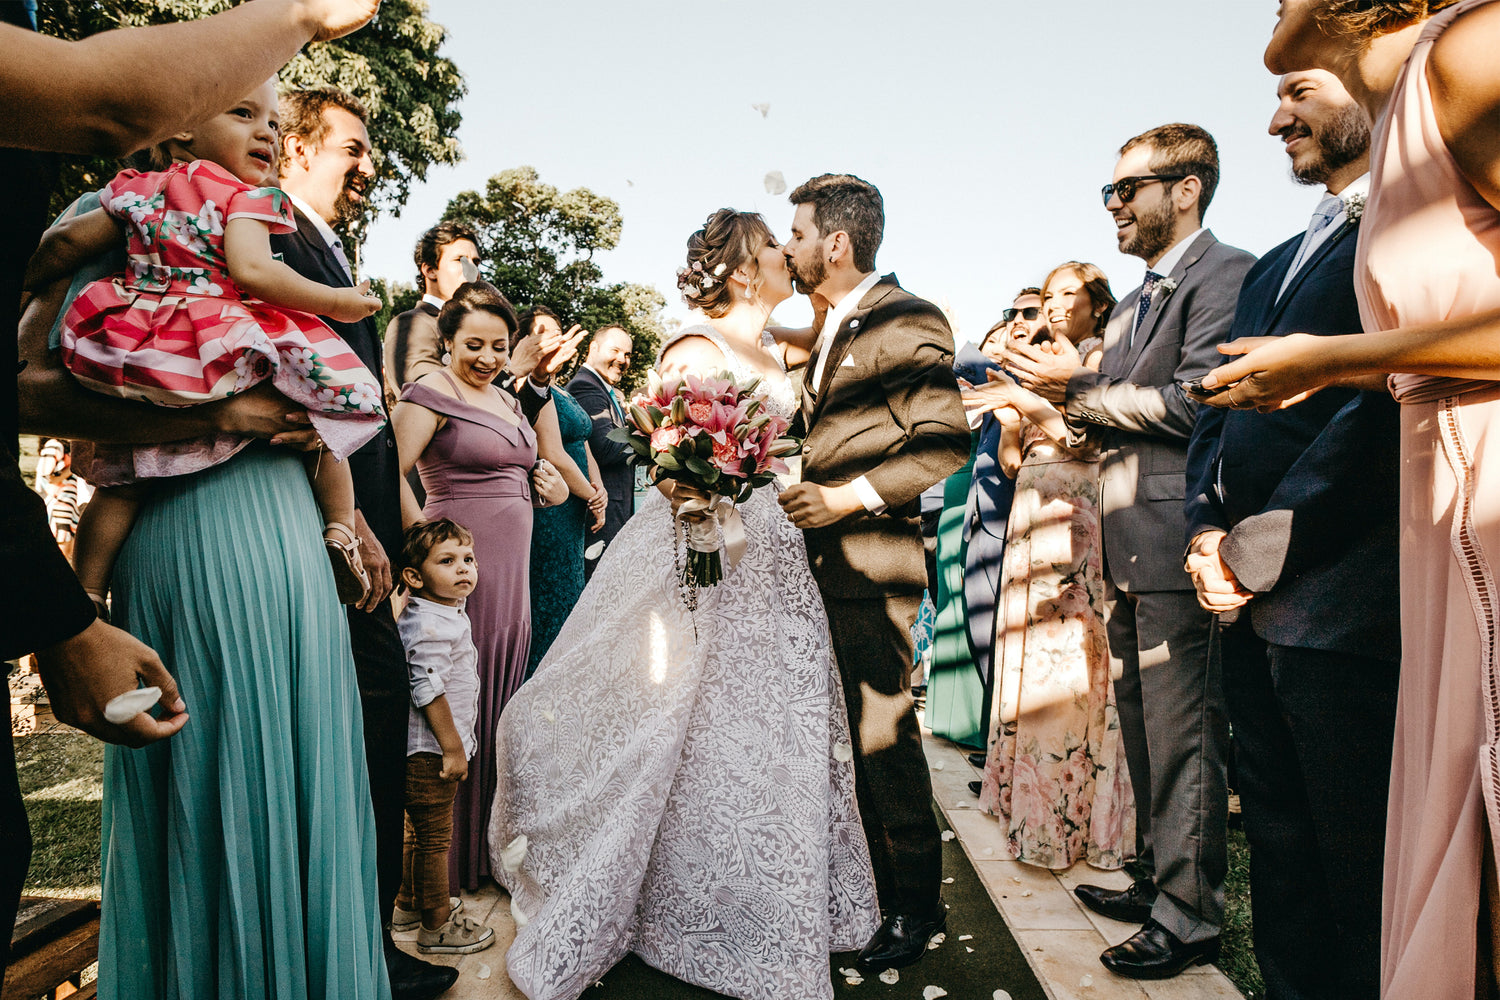 Newlyweds' First Kiss": An enchanting moment as the bride and groom share their first kiss as a married couple, surrounded by love and celebration at their wedding.